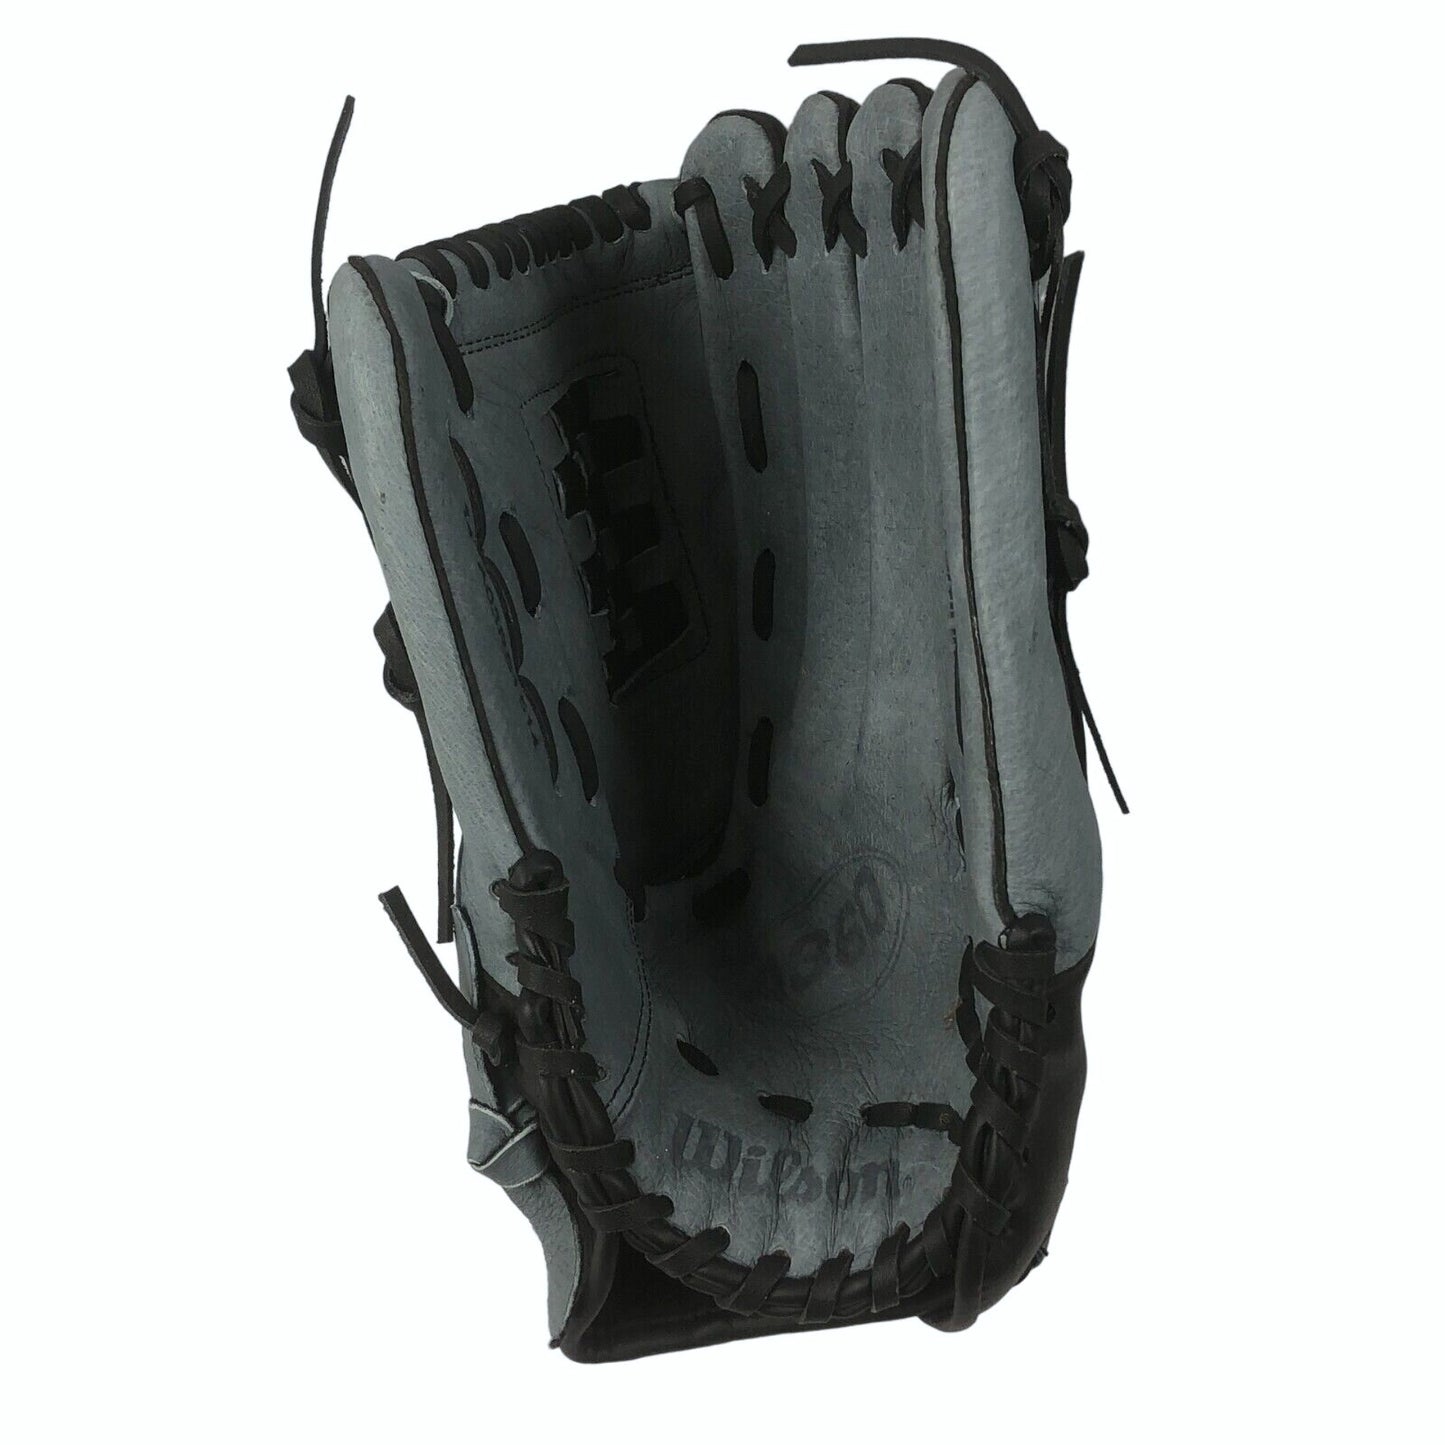 Wilson Adult A360 Right Handed Gray Black Catcher Leather Softball Glove